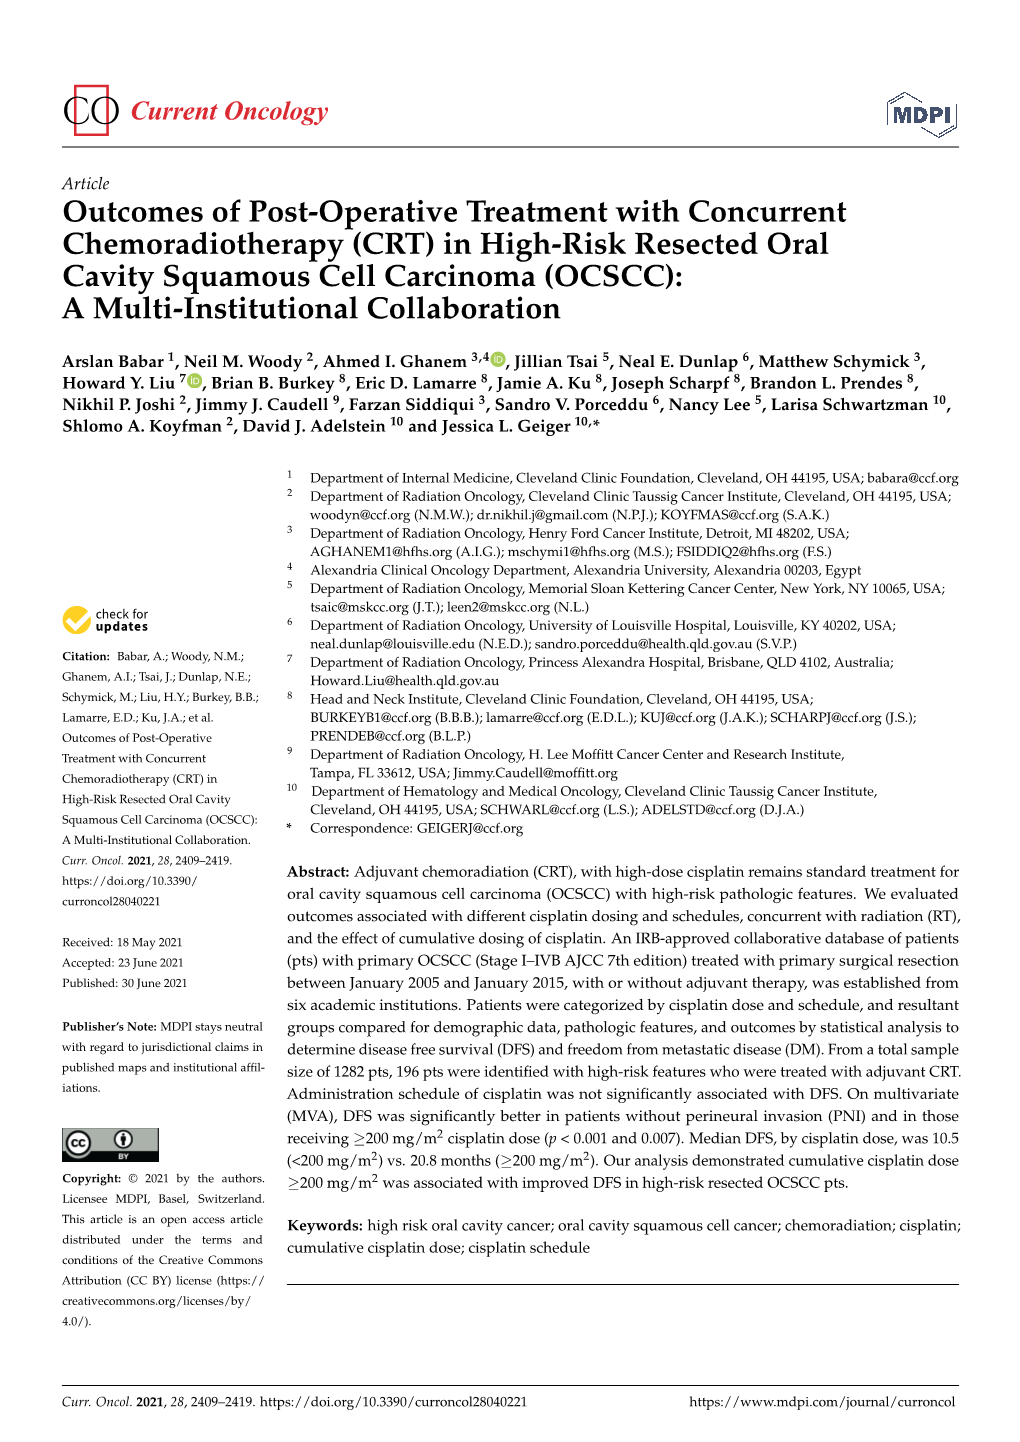 (CRT) in High-Risk Resected Oral Cavity Squamous Cell Carcinoma (OCSCC): a Multi-Institutional Collaboration